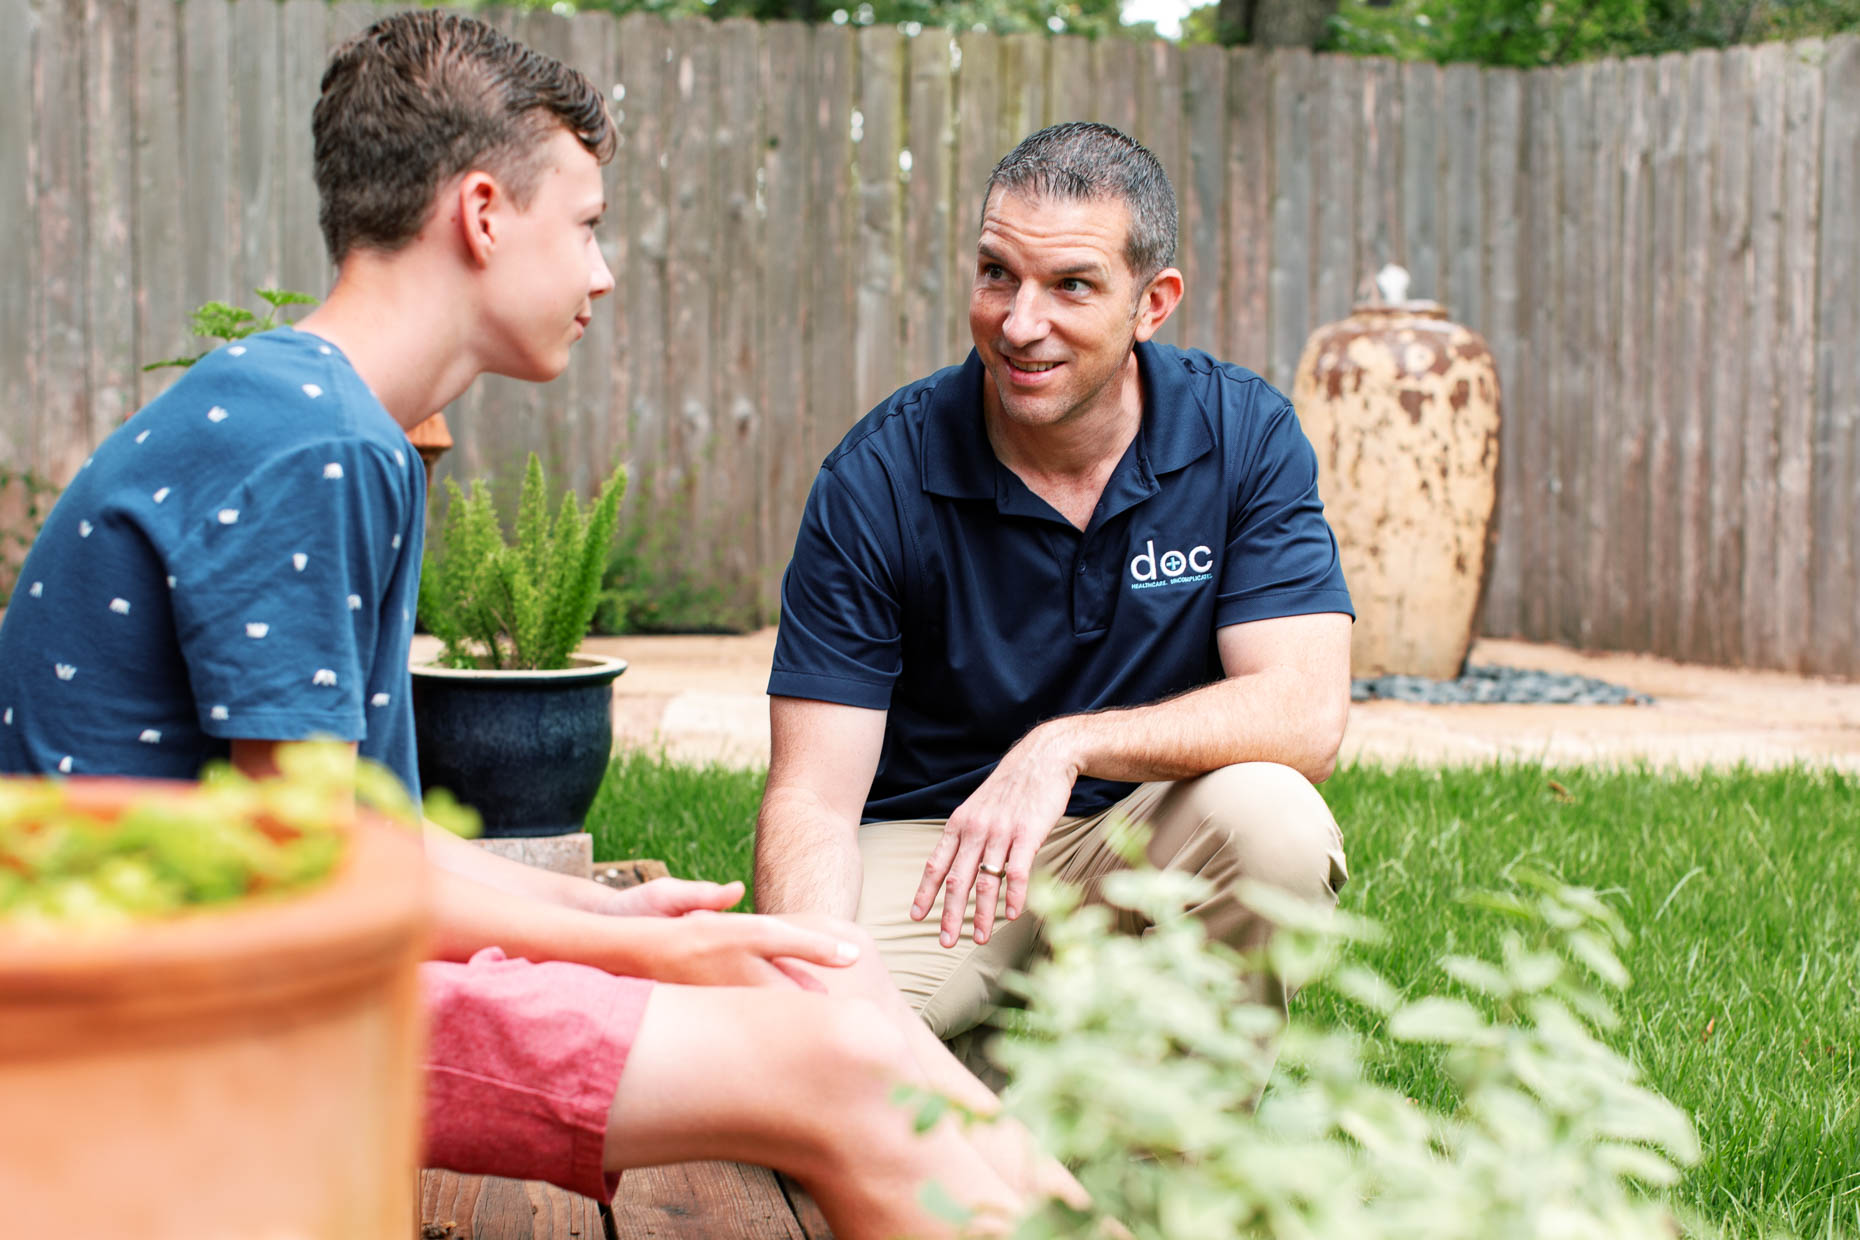 at home healthcare provider interacting with teenager outdoors